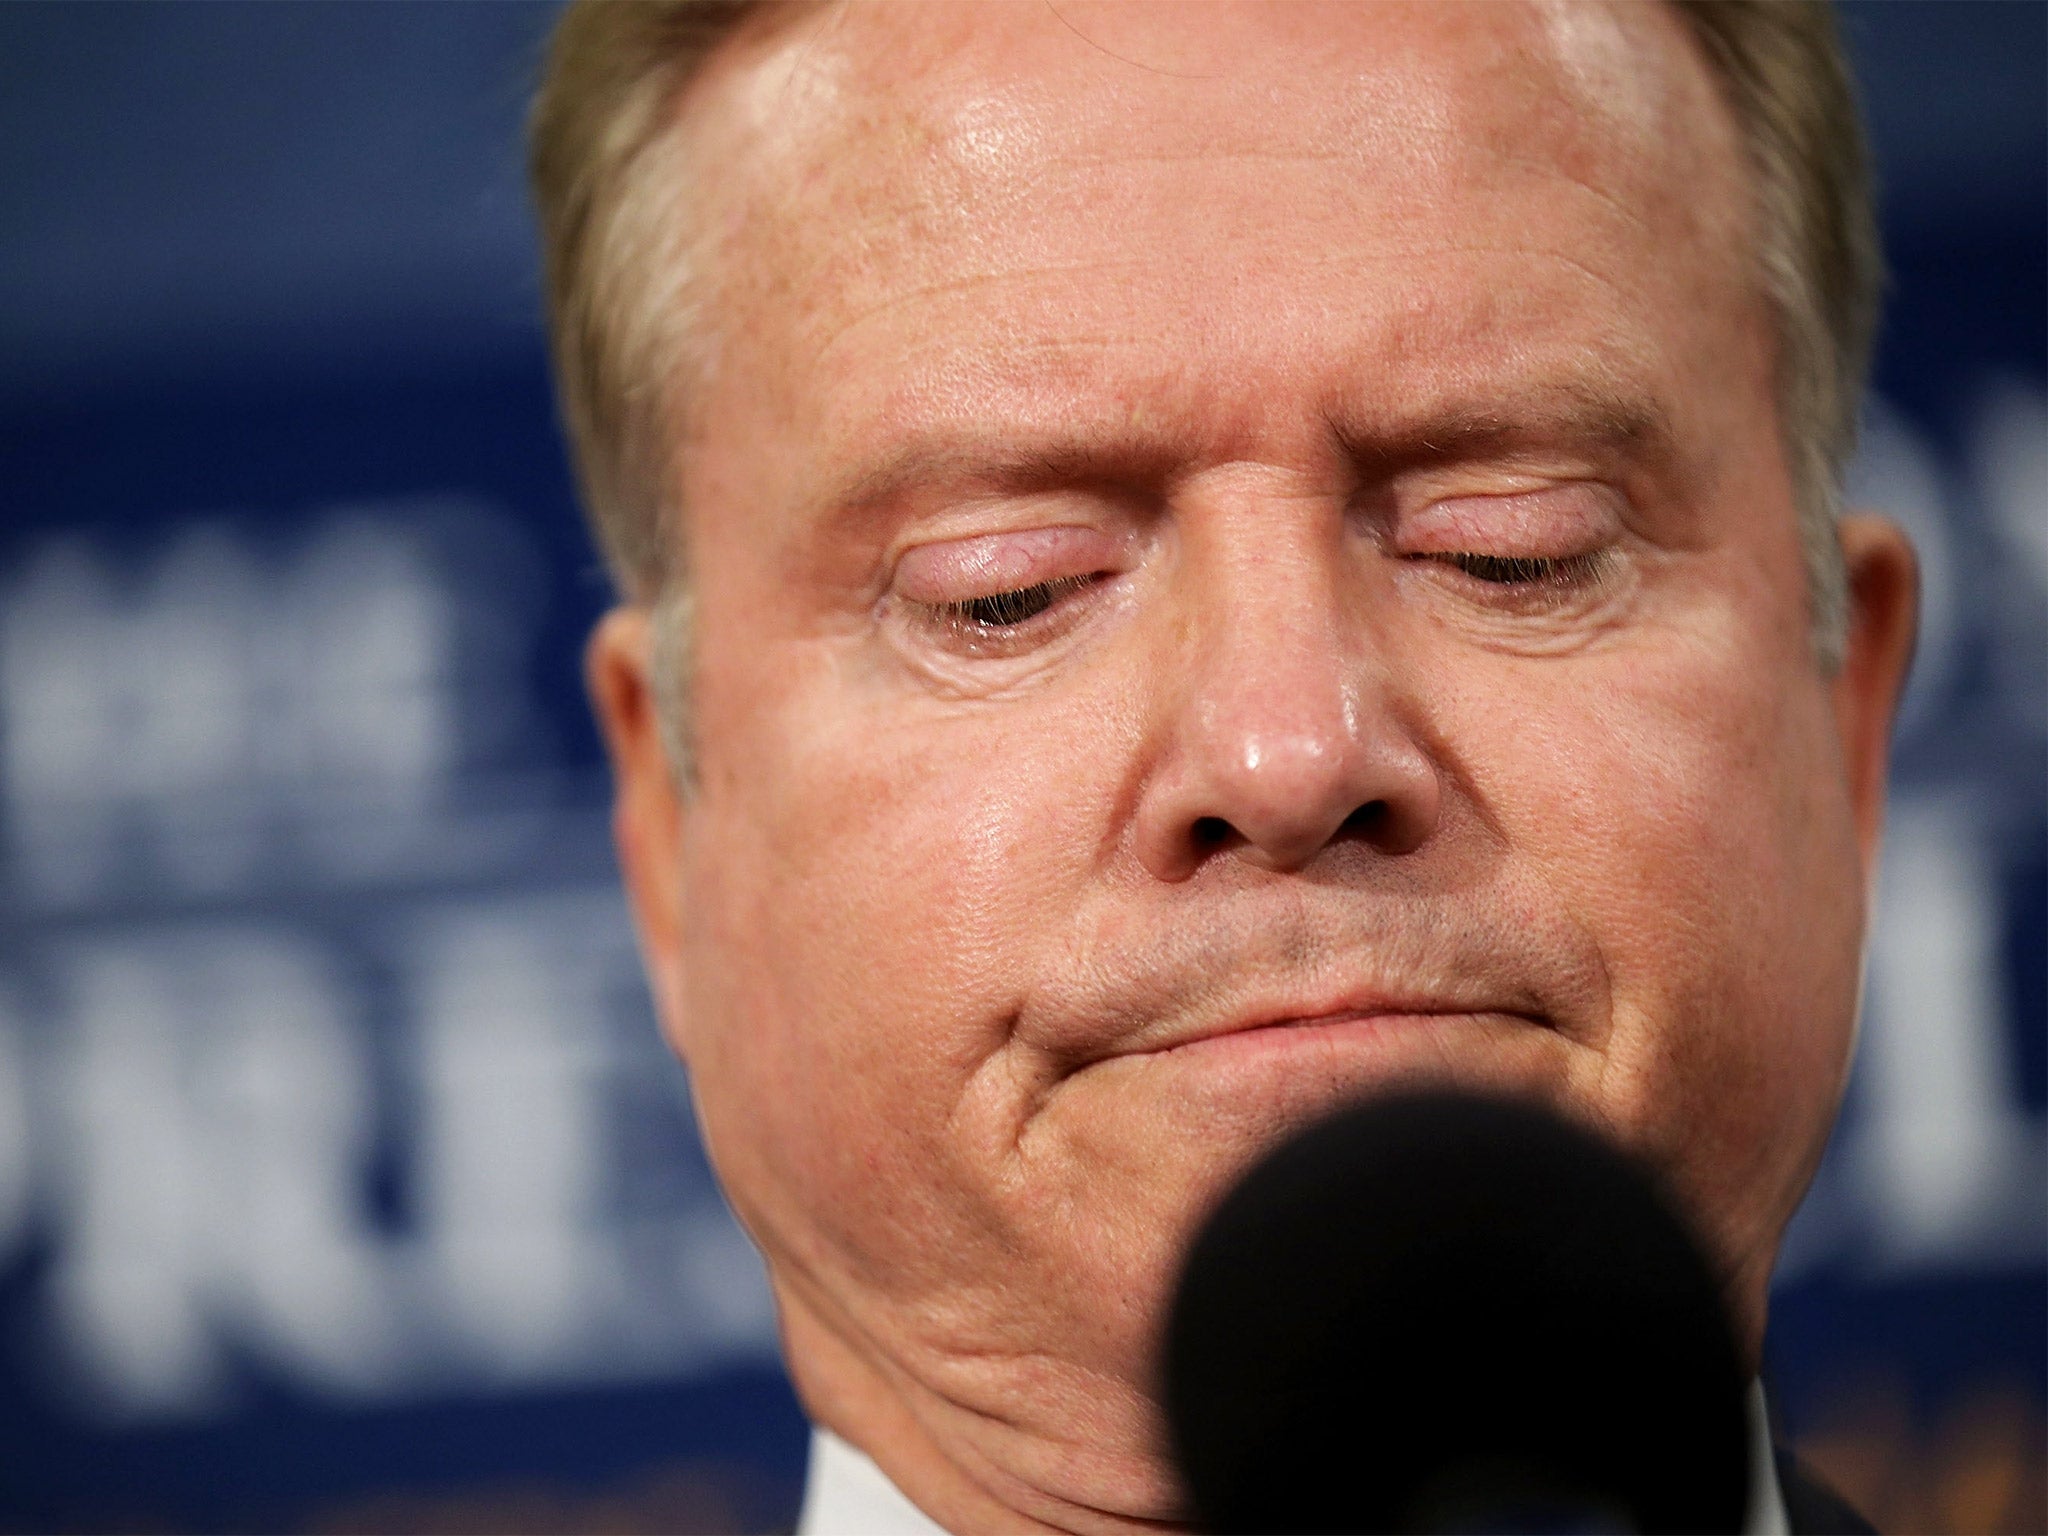 Vietnam veteran Jim Webb announces that he is dropping out of the Democratic presidential race in Washington, DC, on Tuesday